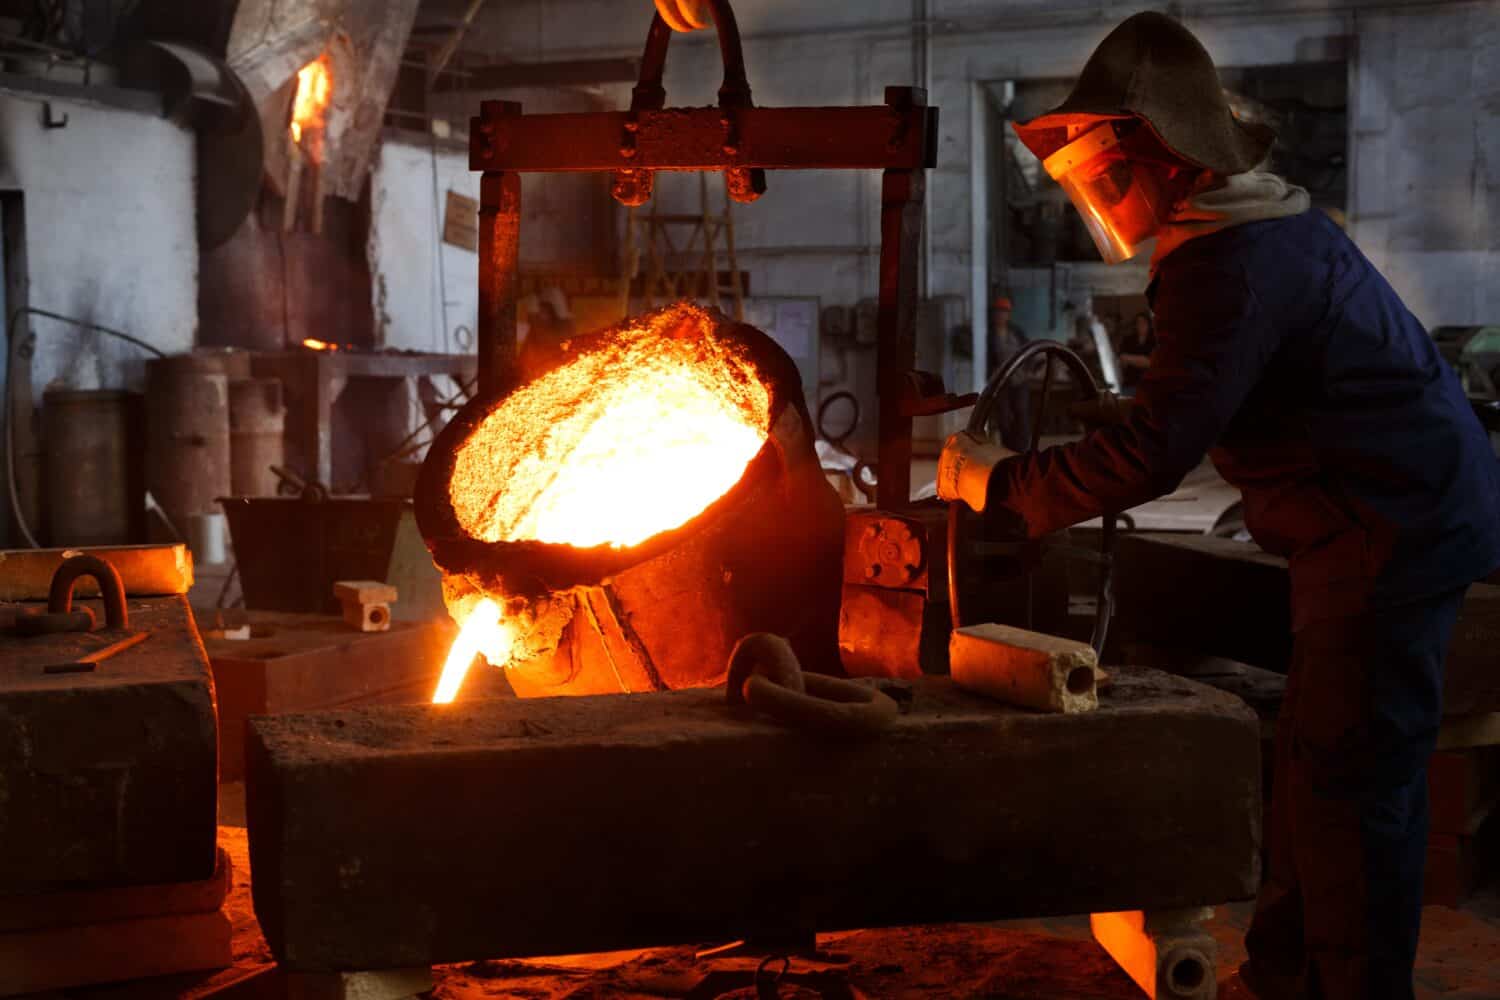 Industrial worker in protective gear pours molten metal at steel foundry. Manufacturing process in heavy industry with furnace. Skilled laborer handles high-temperature metallurgy, safety action.